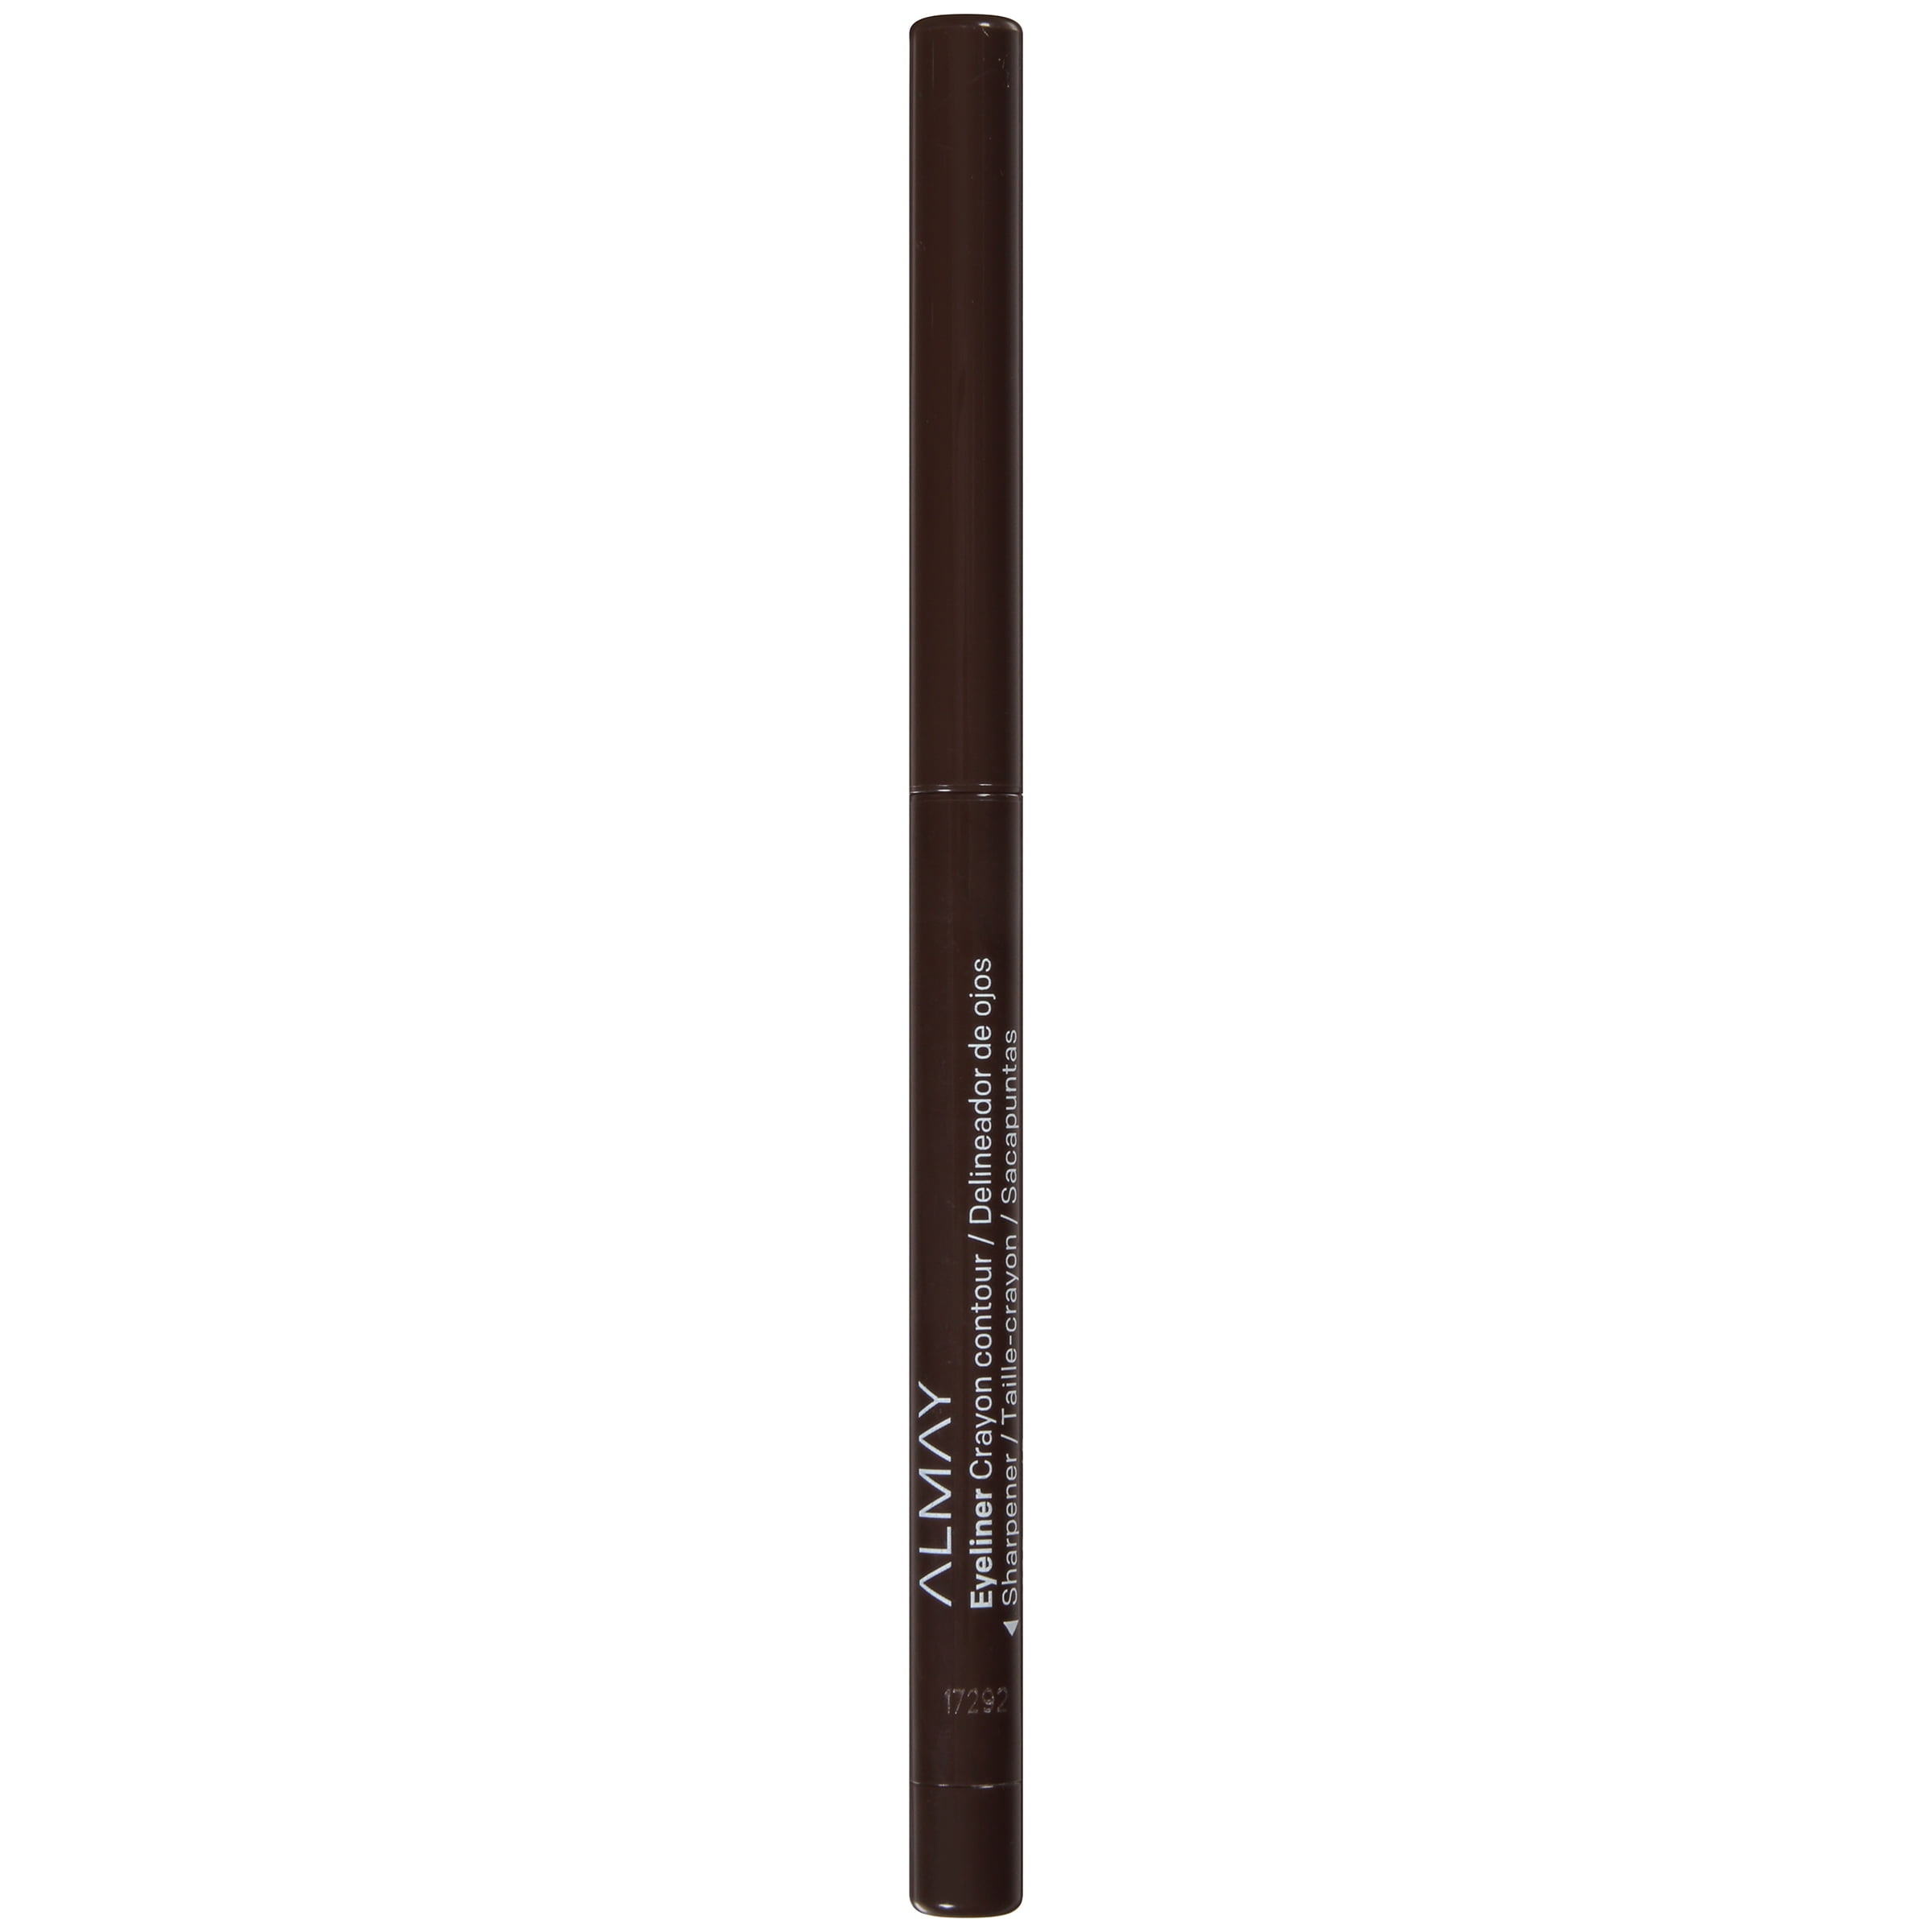 Almay Eyeliner Pencil, Hypoallergenic, Cruelty Free, Oil Free, Fragrance Free, Ophthalmologist Tested, Long Wearing and Water Resistant, with Built in Sharpener, 207 Brown, 0.01 oz